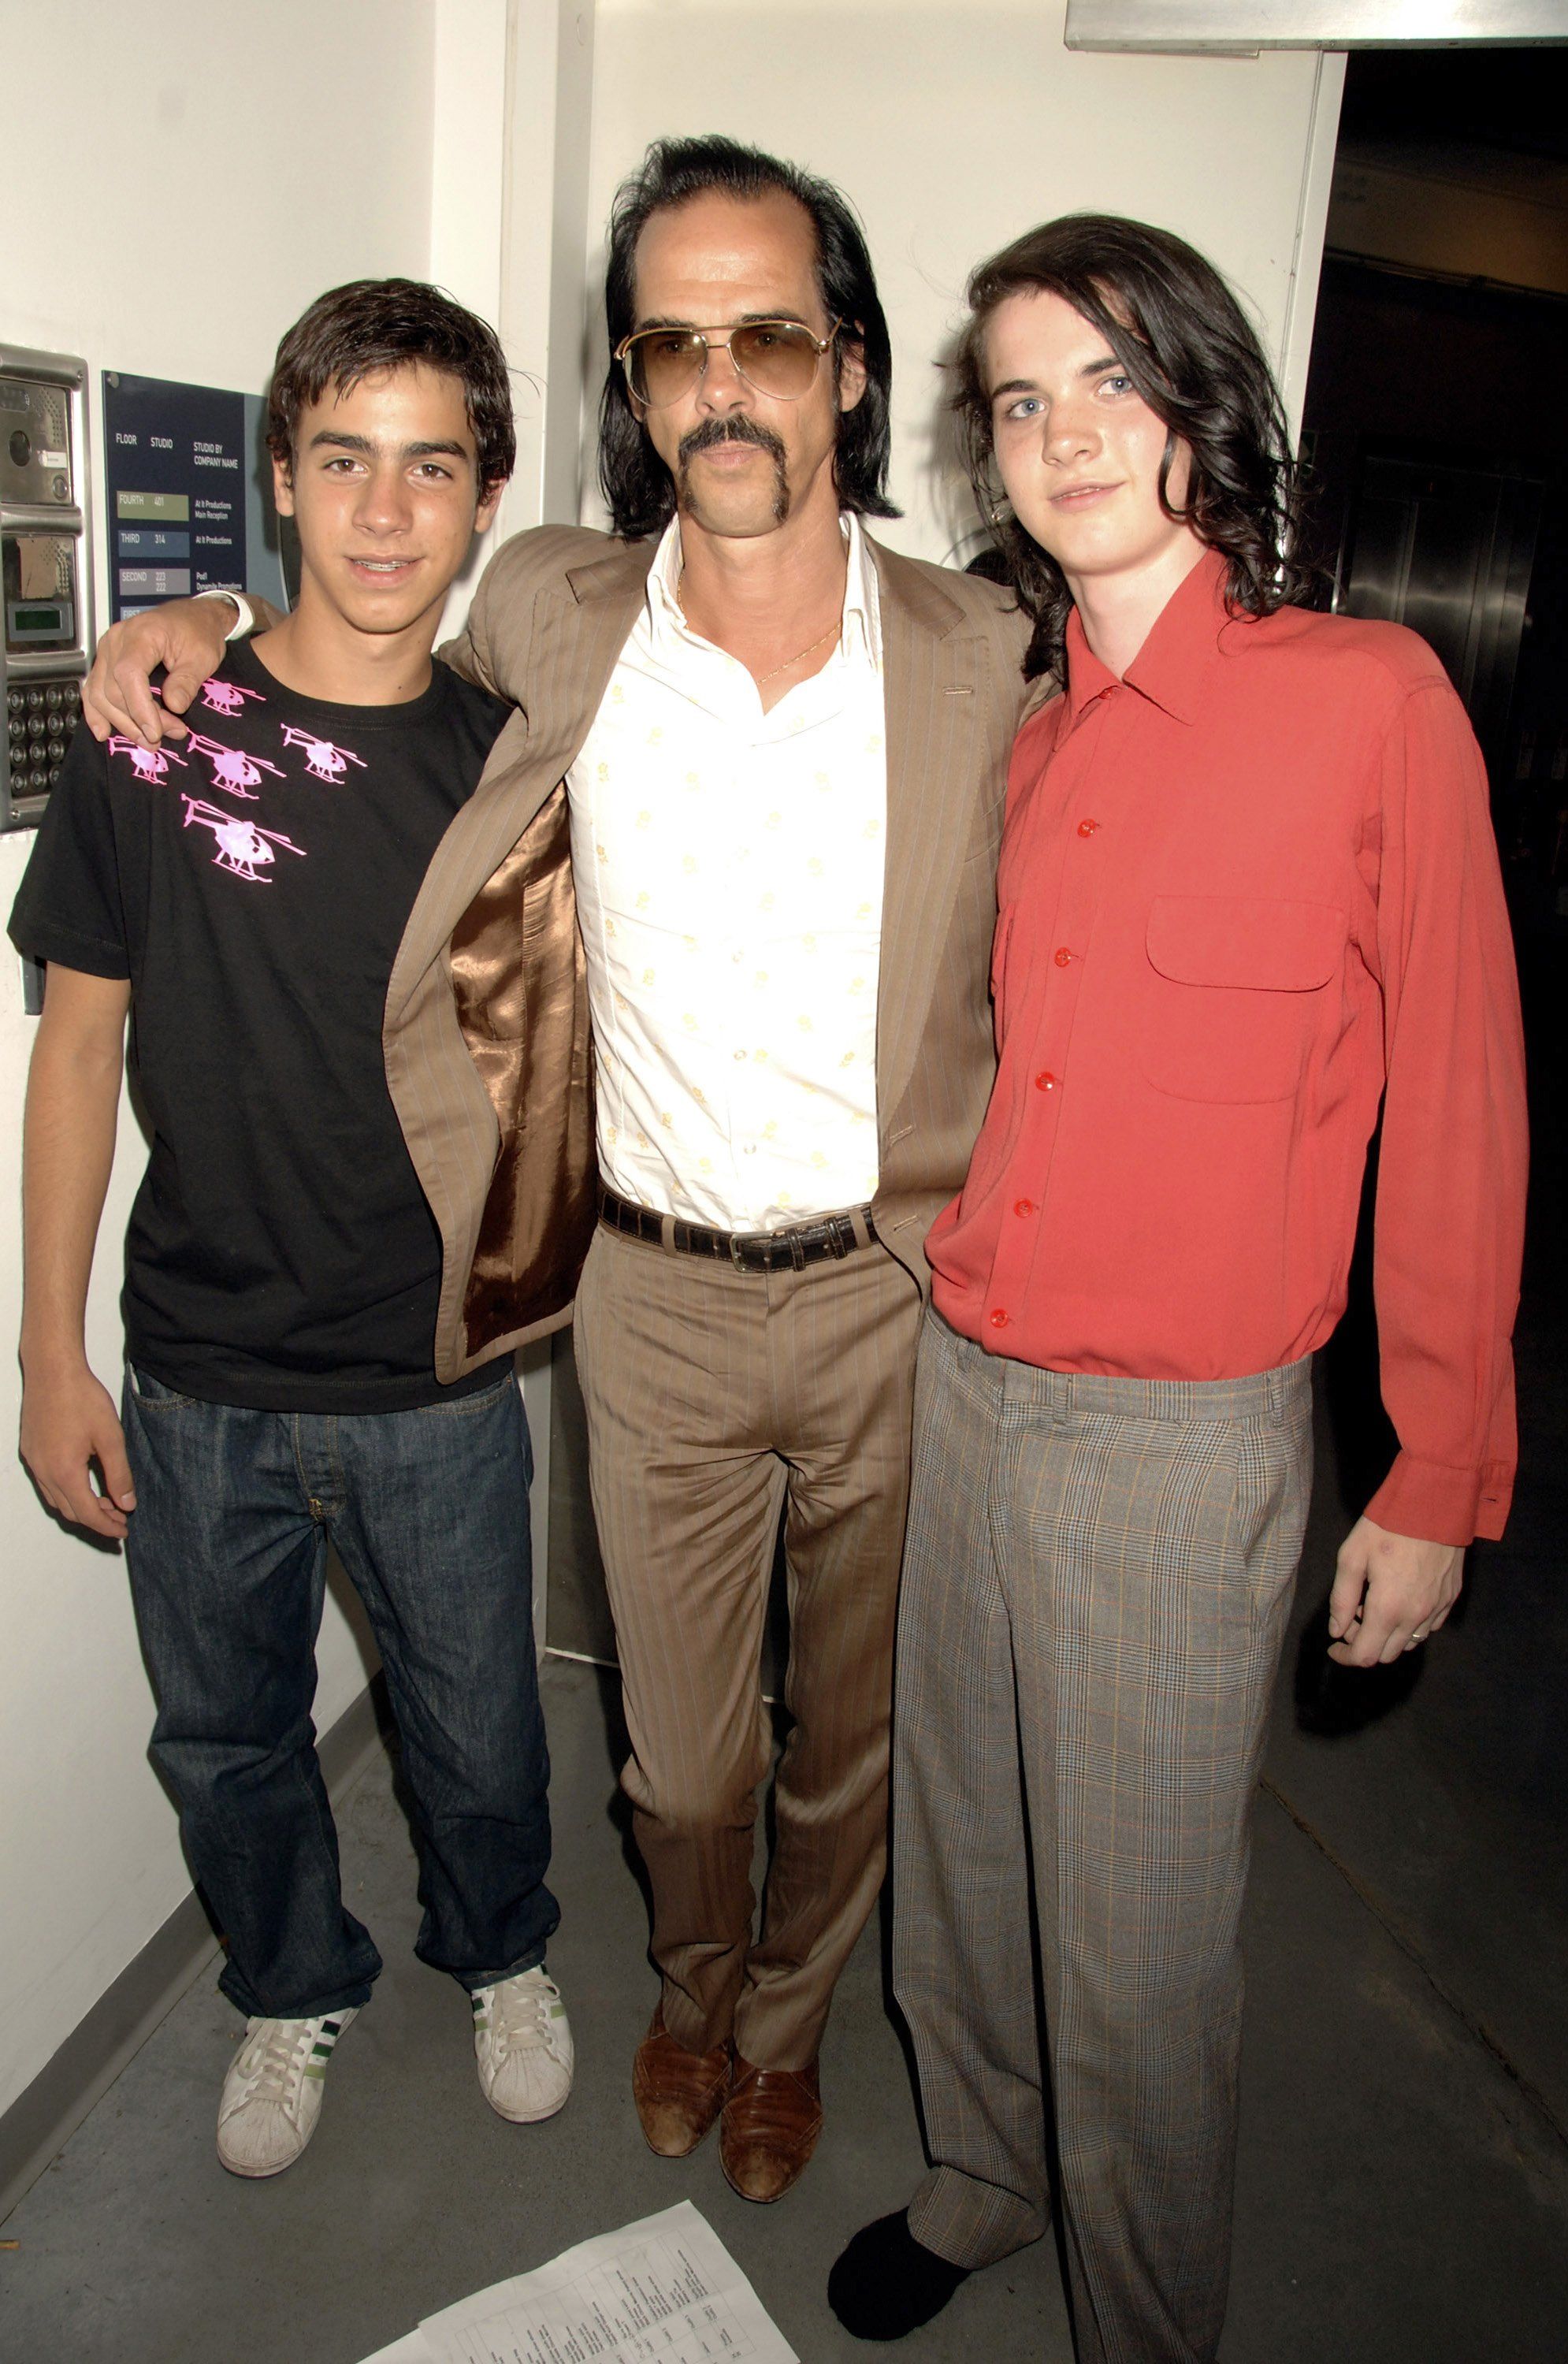 Nick Cave, Luke Cave, and Jefro Cave during the fashion show at Portobello Film Festival curated by Bella Freud with clothes from Portobello Market, at Westbourne Studios on August 3, 2006 in London, England. | Source: Getty Images